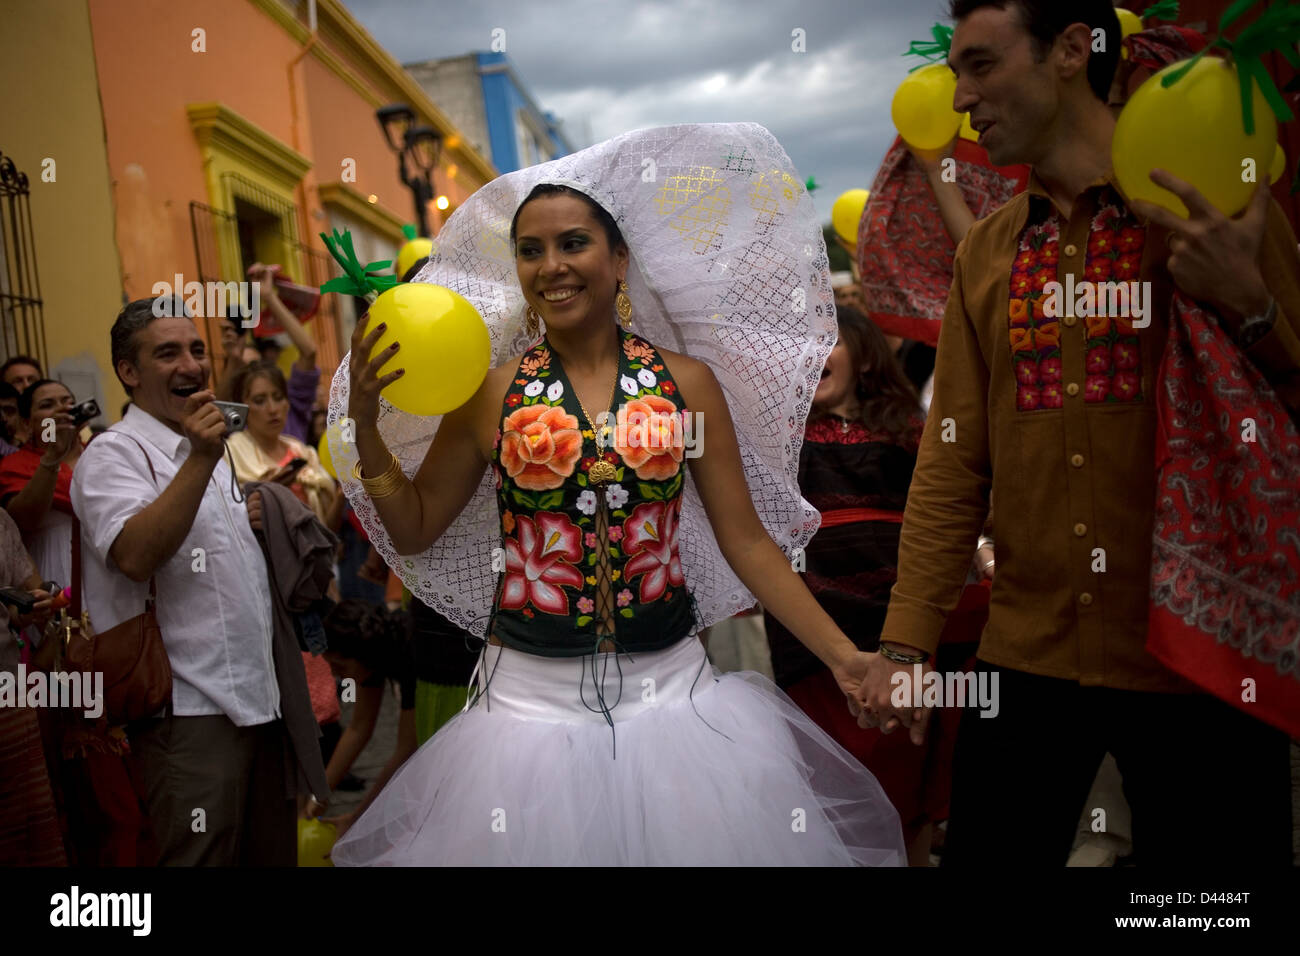 A bride dressed as a Tehuana holds her groom by the hand during a wedding in Oaxaca, Mexico. Stock Photo